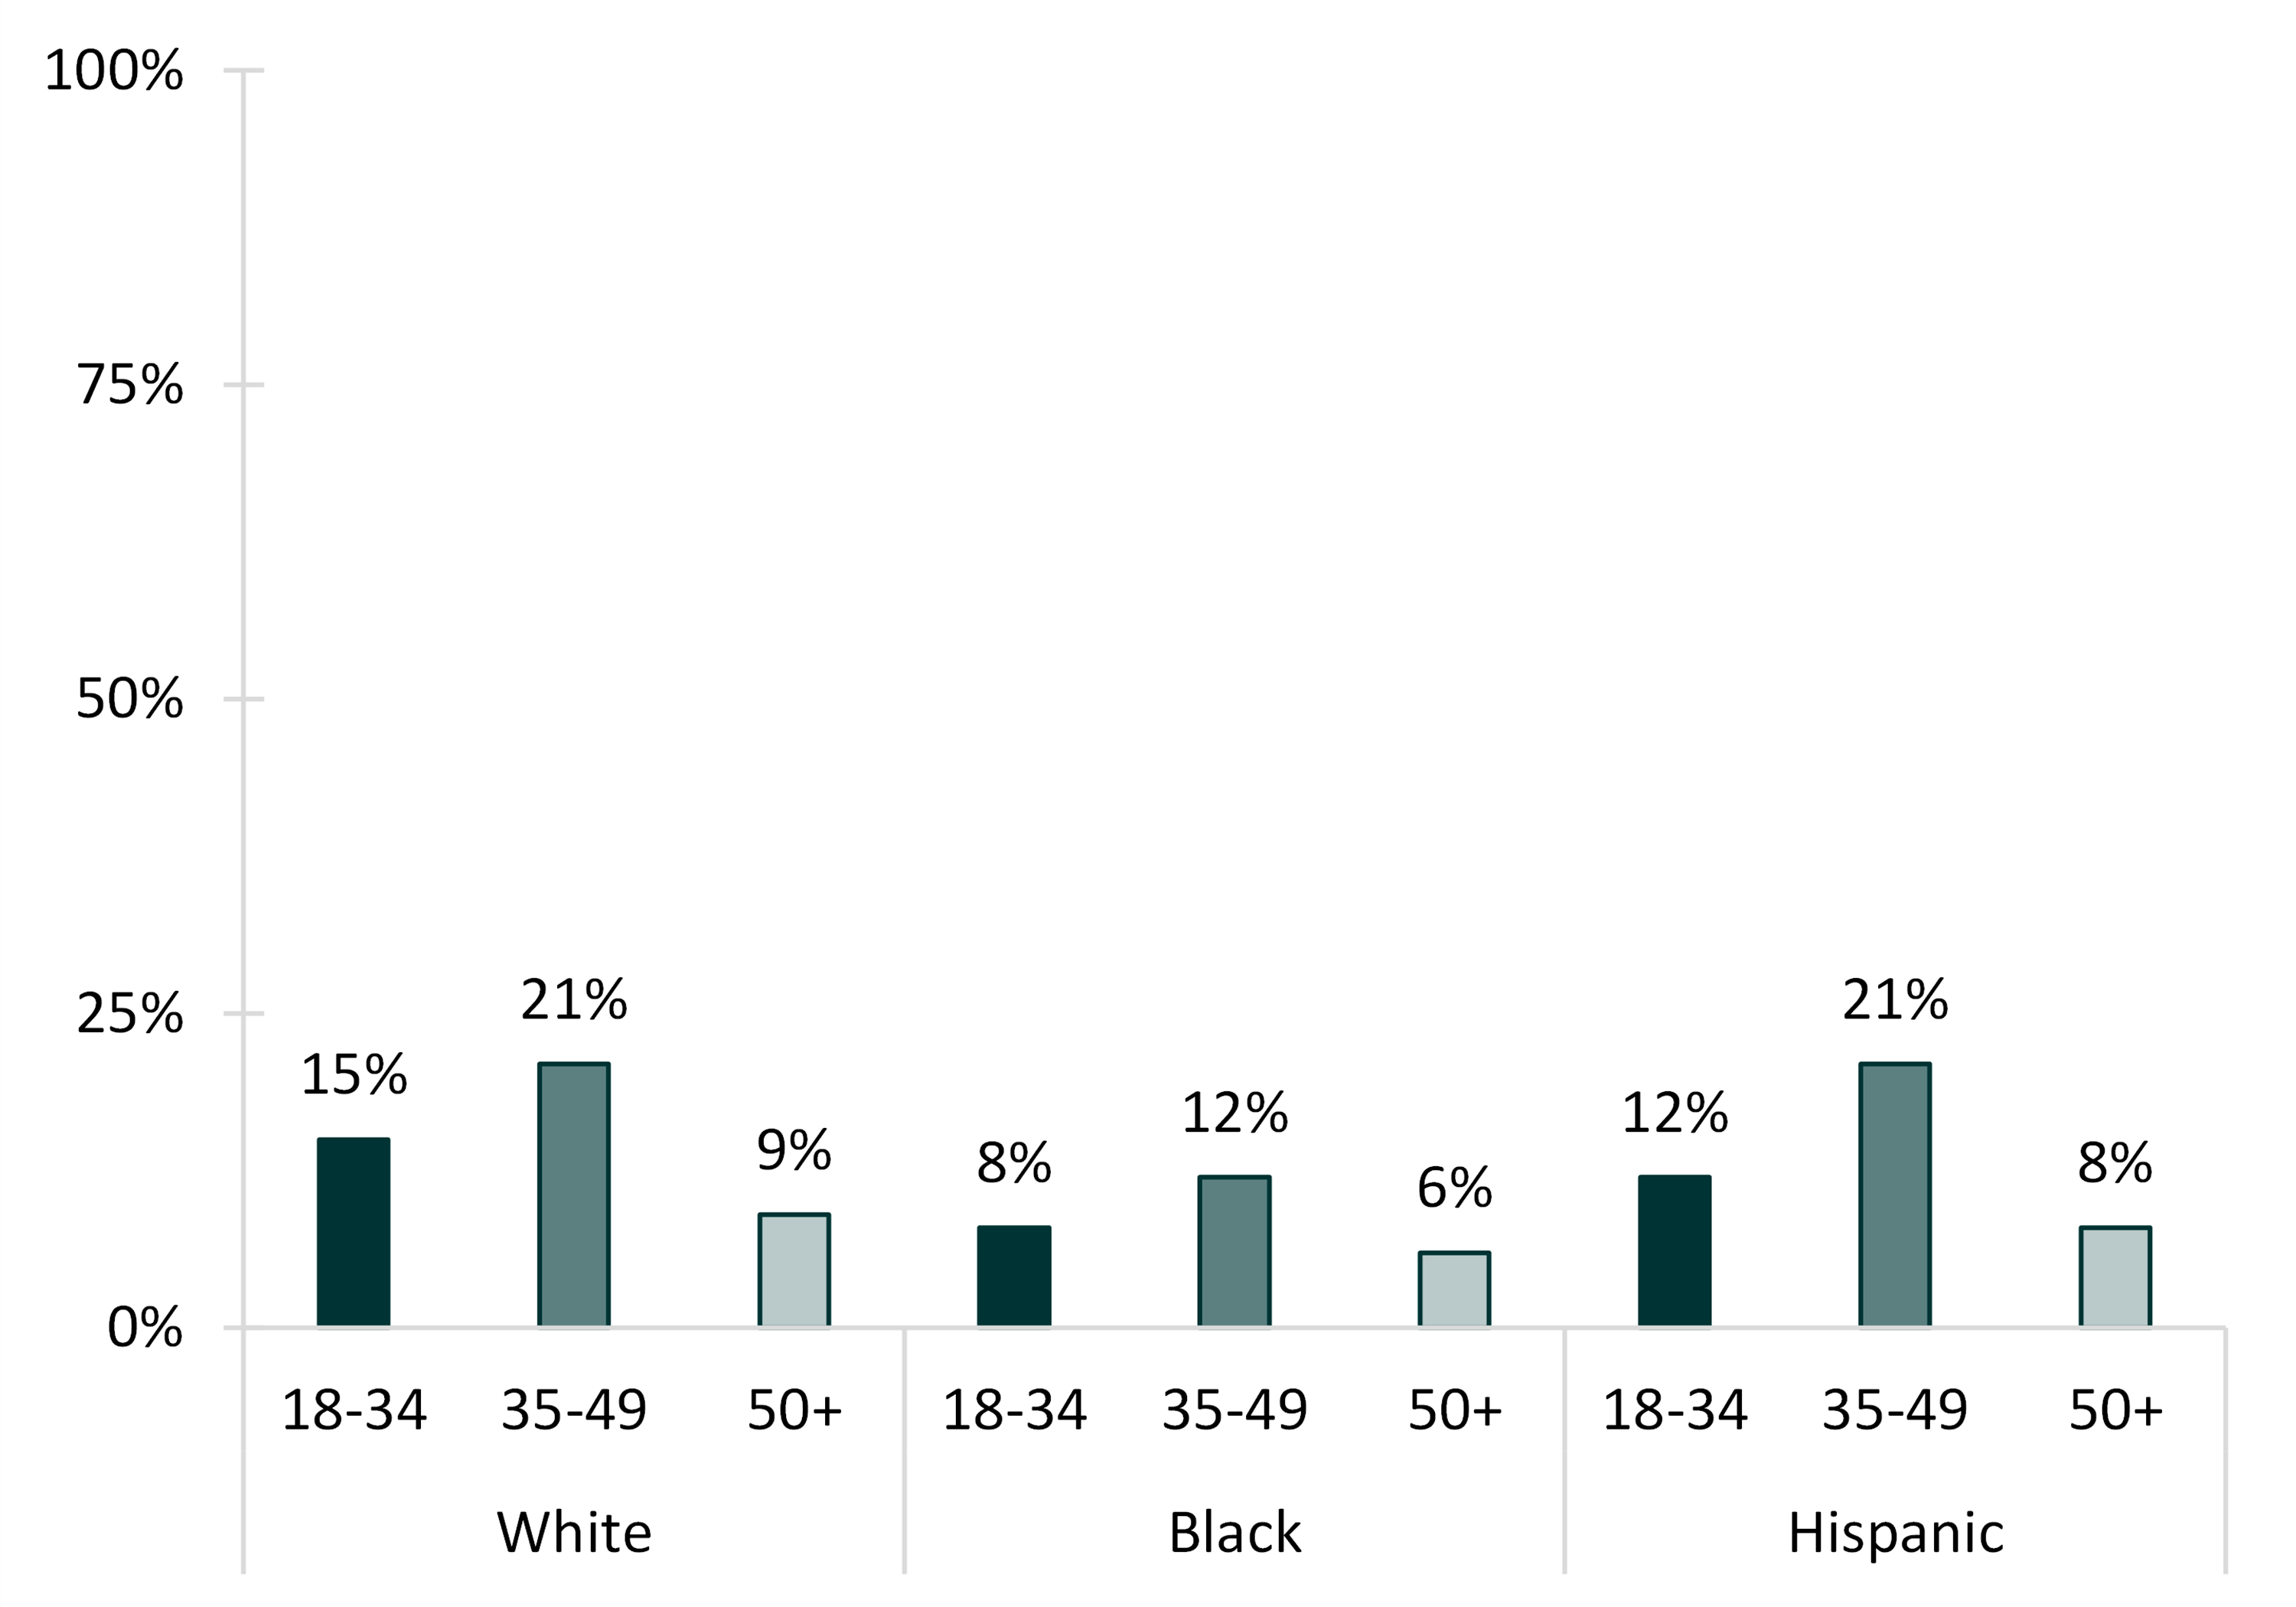 teal bar chart shows Figure 3: Percentage of Unmarried Individuals Cohabiting, by Race and Age Group, 2018